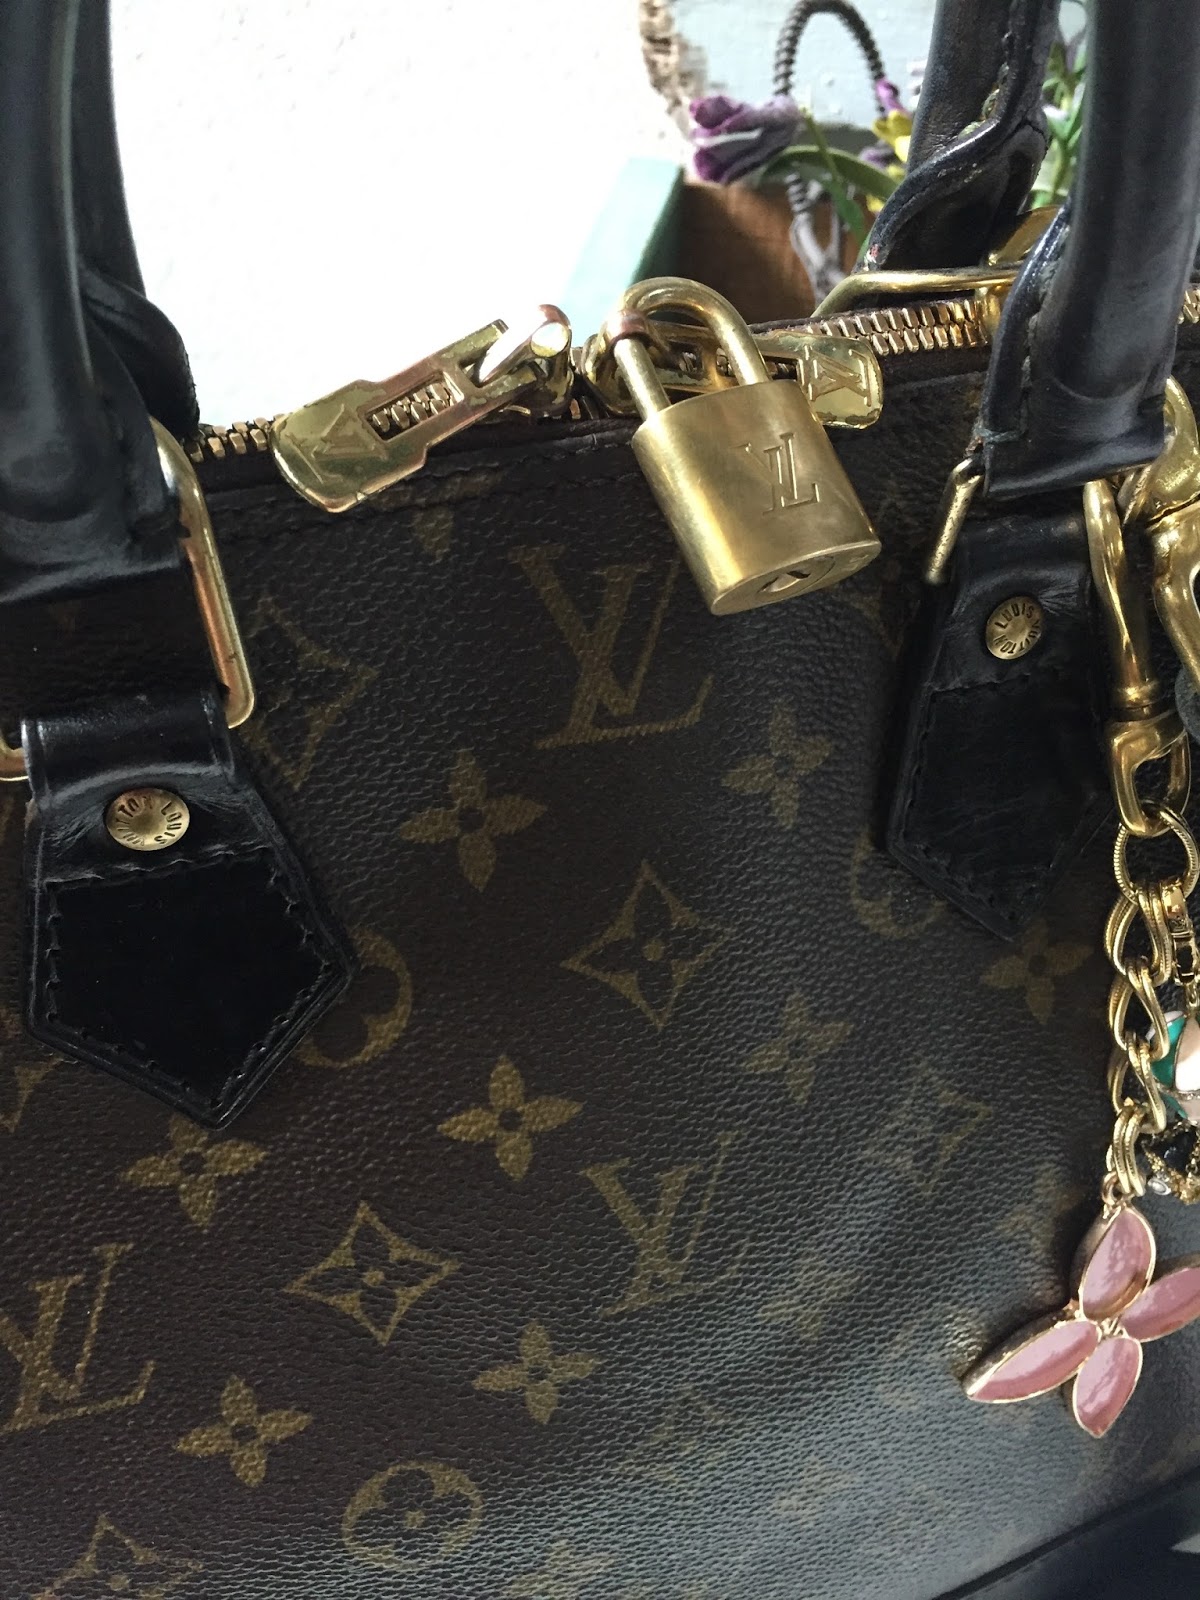 Louis Vuitton - Advice for Louis Vuitton Alma vachetta water spots/stain  and general lightening of the leather